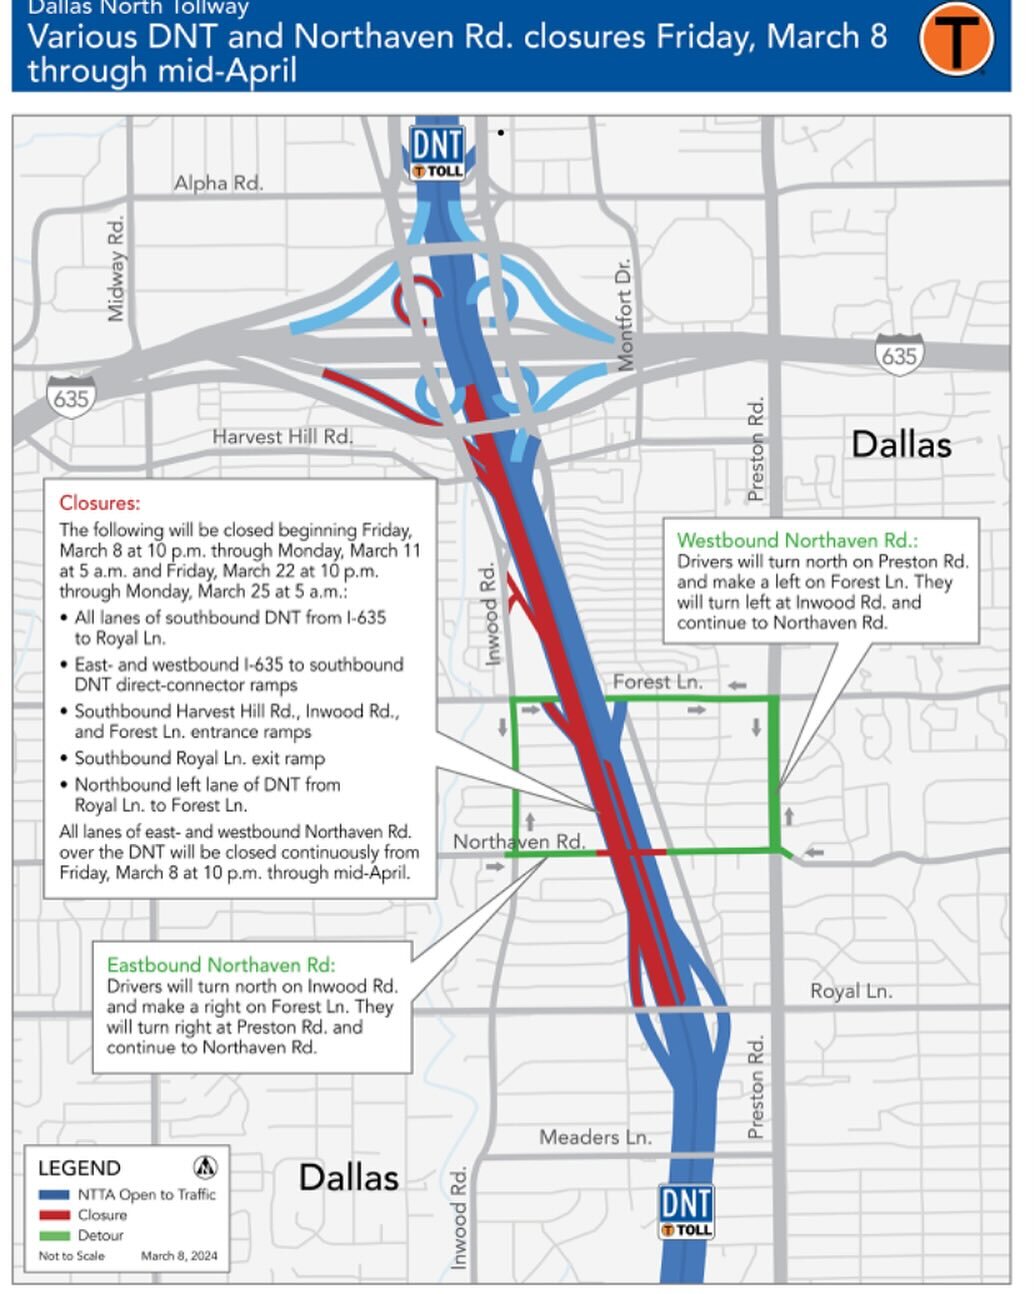 Alert: Roadwork may cause intermittent closures of the trail at the tollway.